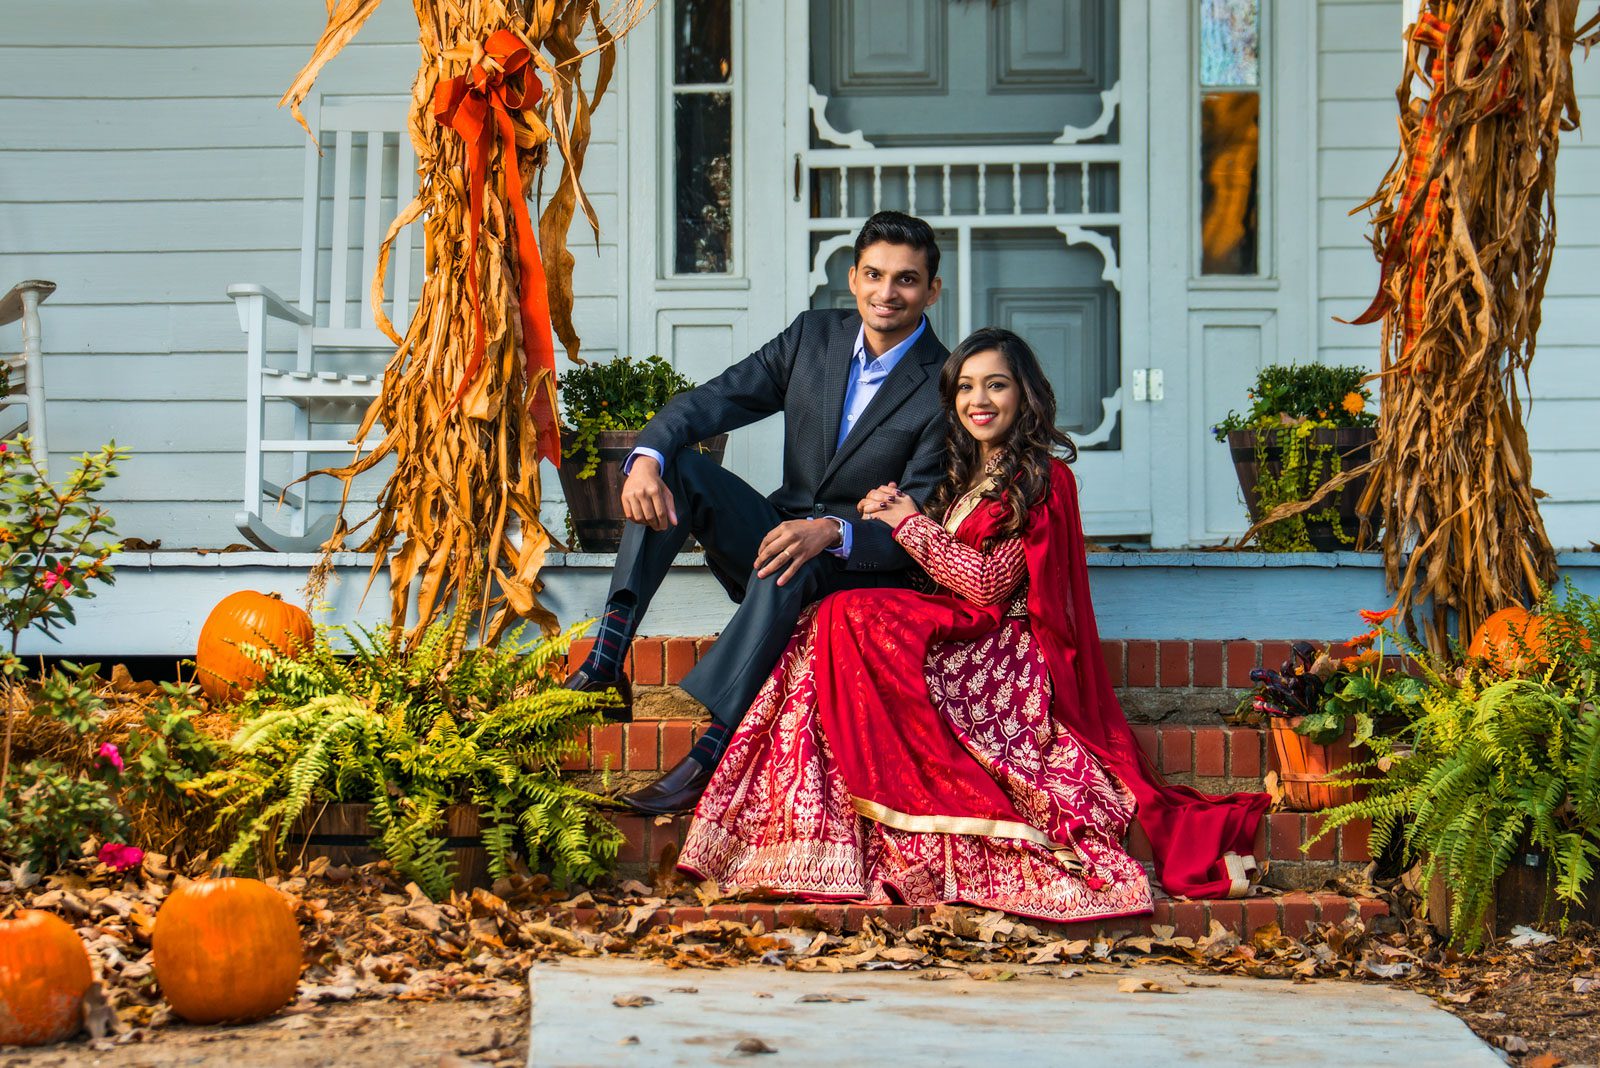 wedding photographer in Atlanta capturing hindu bride and groom for their wedding portrait session at The McDaniel Farm Park in Duluth.